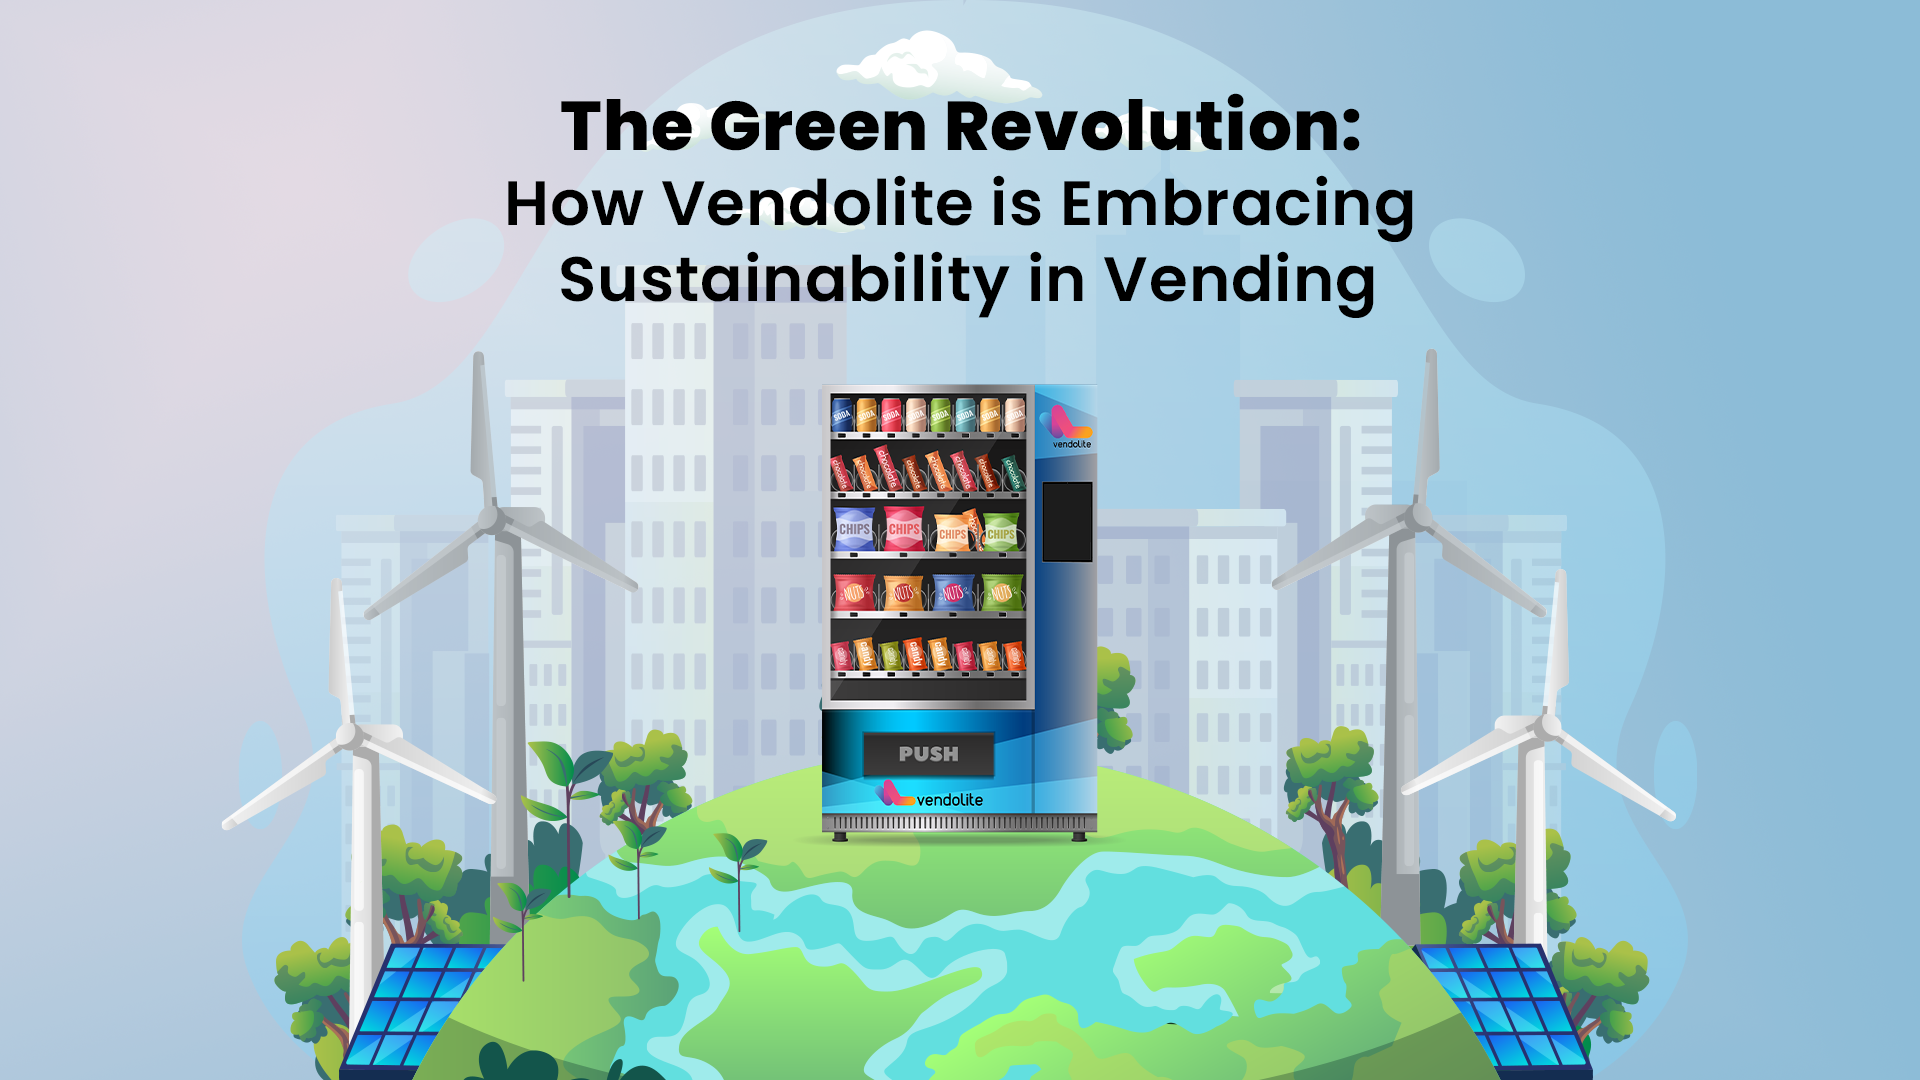 The Green Revolution: How Vendolite is Embracing Sustainability in Vending